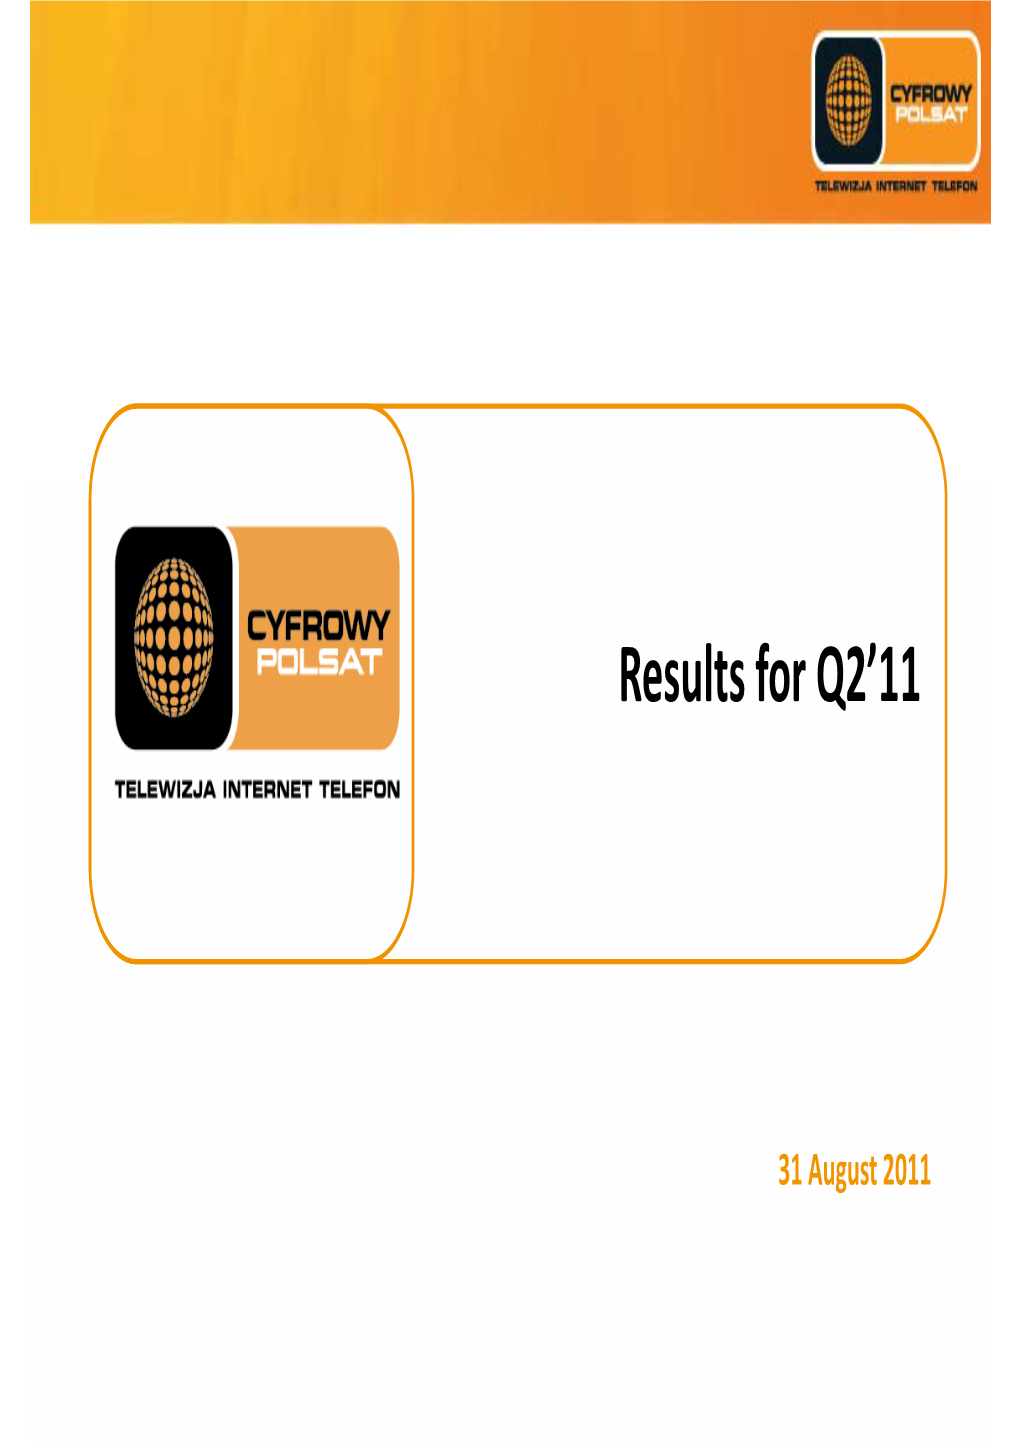 Results for Q2'11